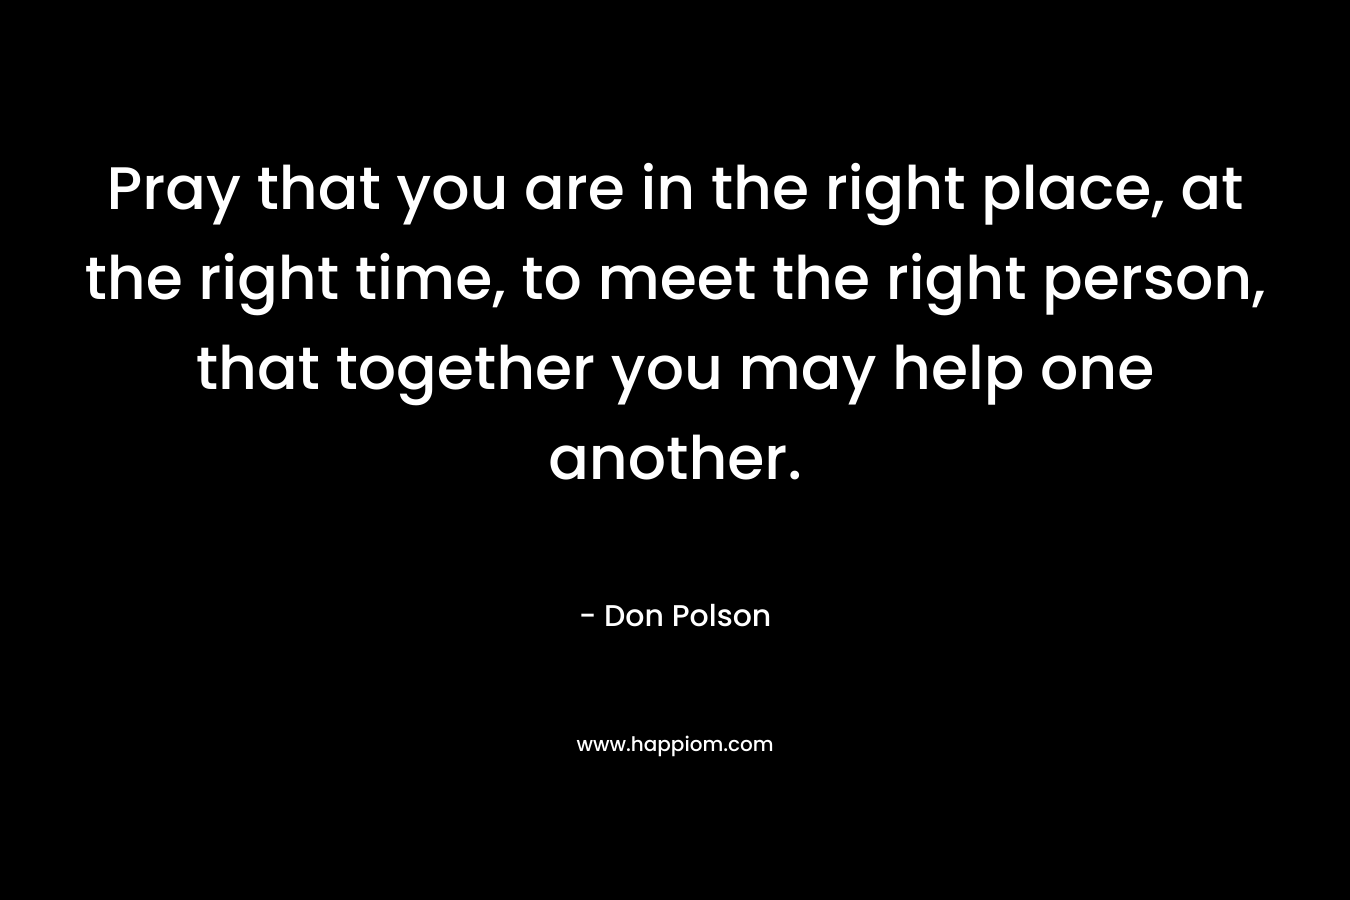 Pray that you are in the right place, at the right time, to meet the right person, that together you may help one another. – Don Polson